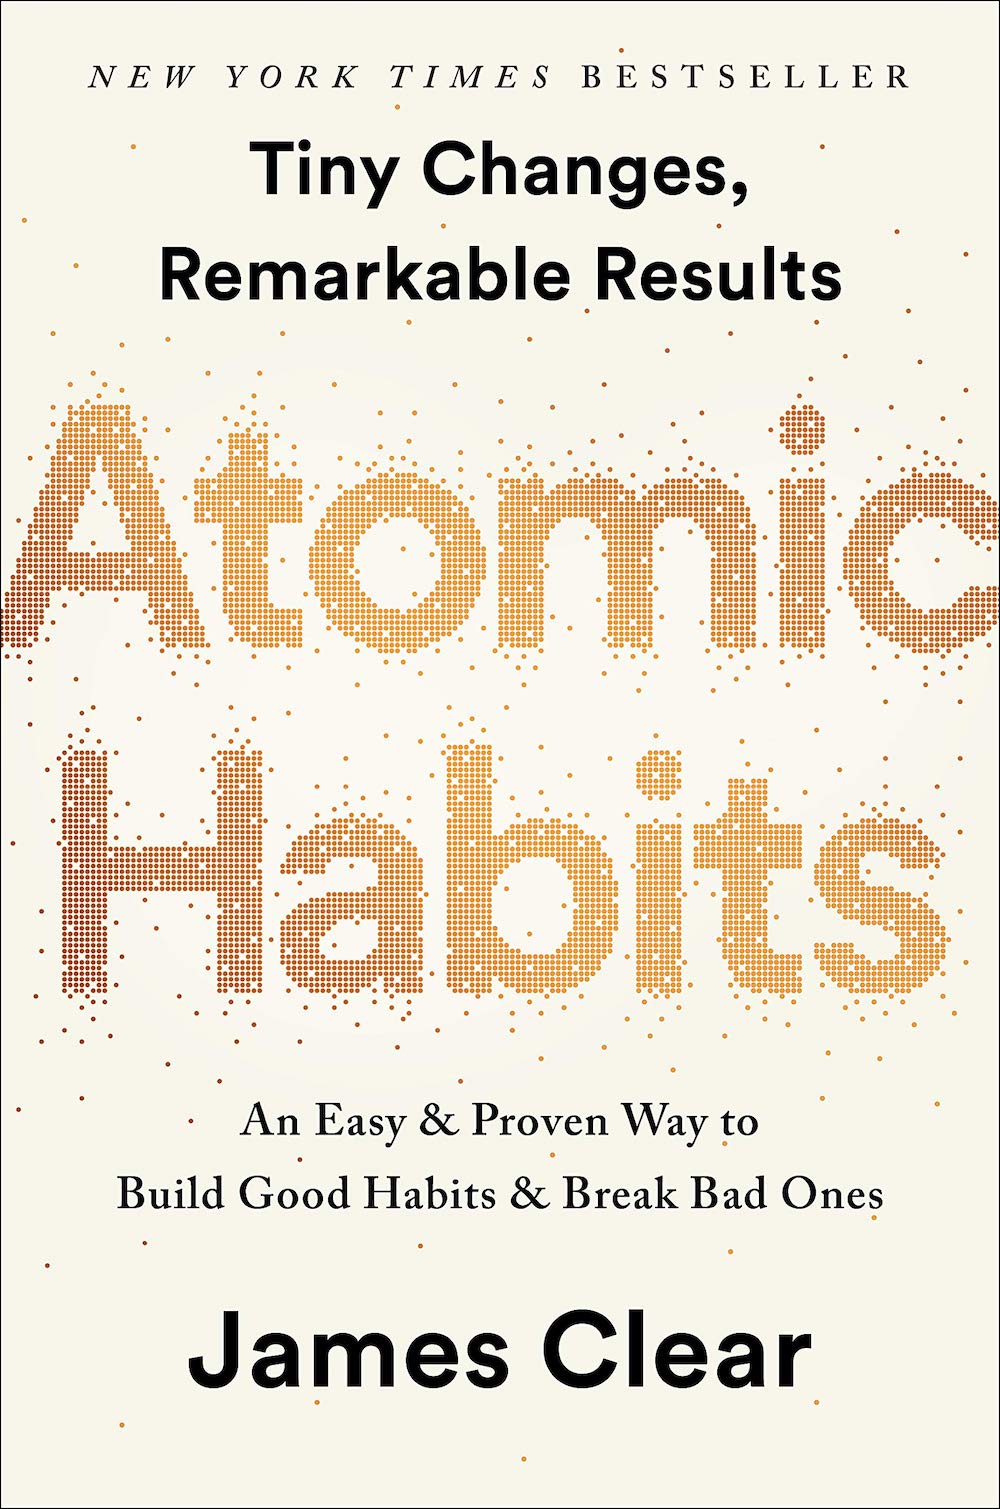 The cover of Atomic Habits